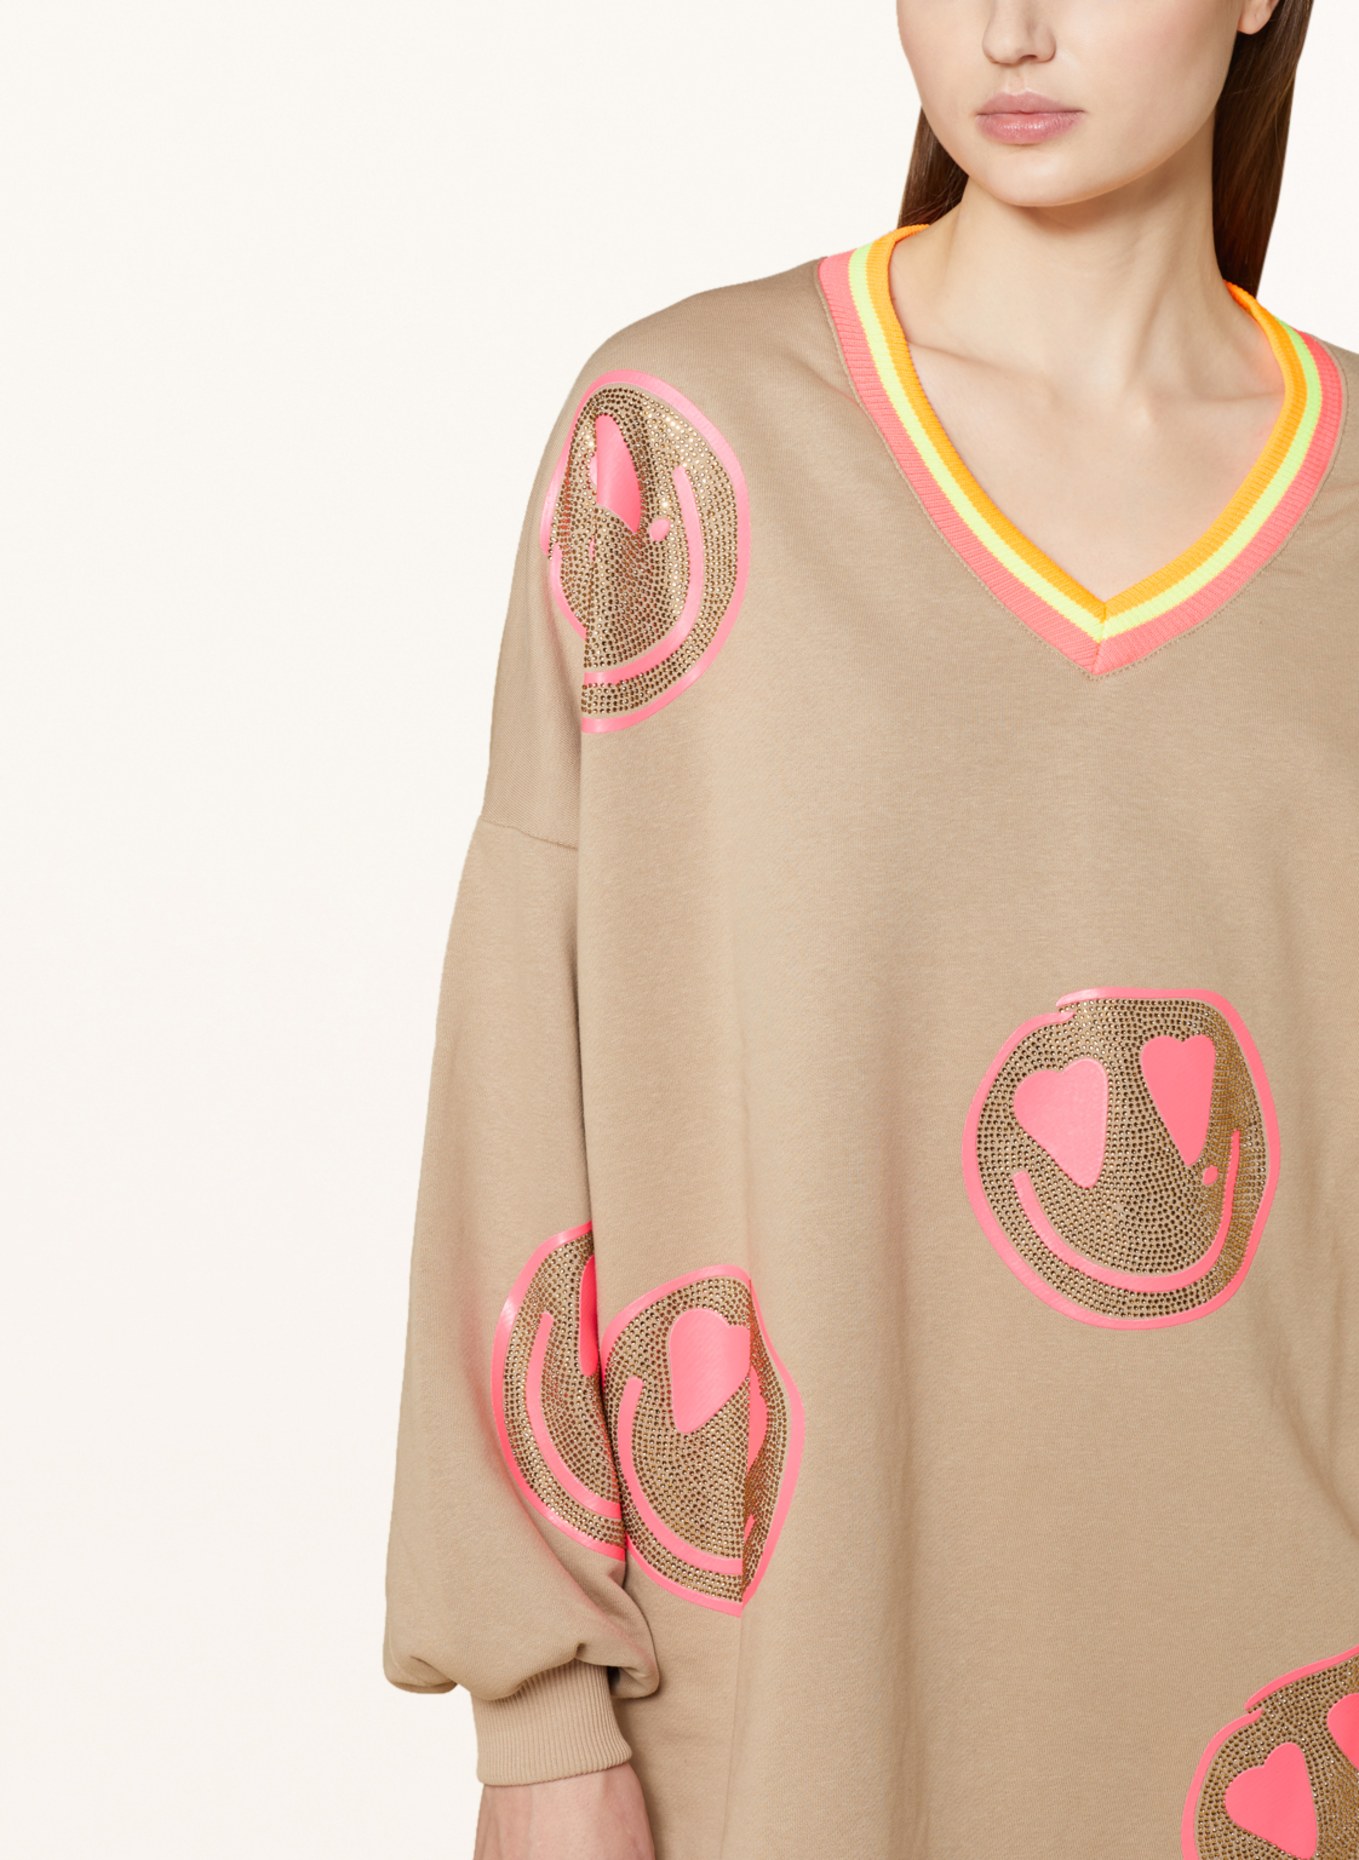 miss goodlife Oversized sweatshirt HAPPY FACE with decorative gems, Color: BEIGE/ NEON PINK/ GOLD (Image 4)